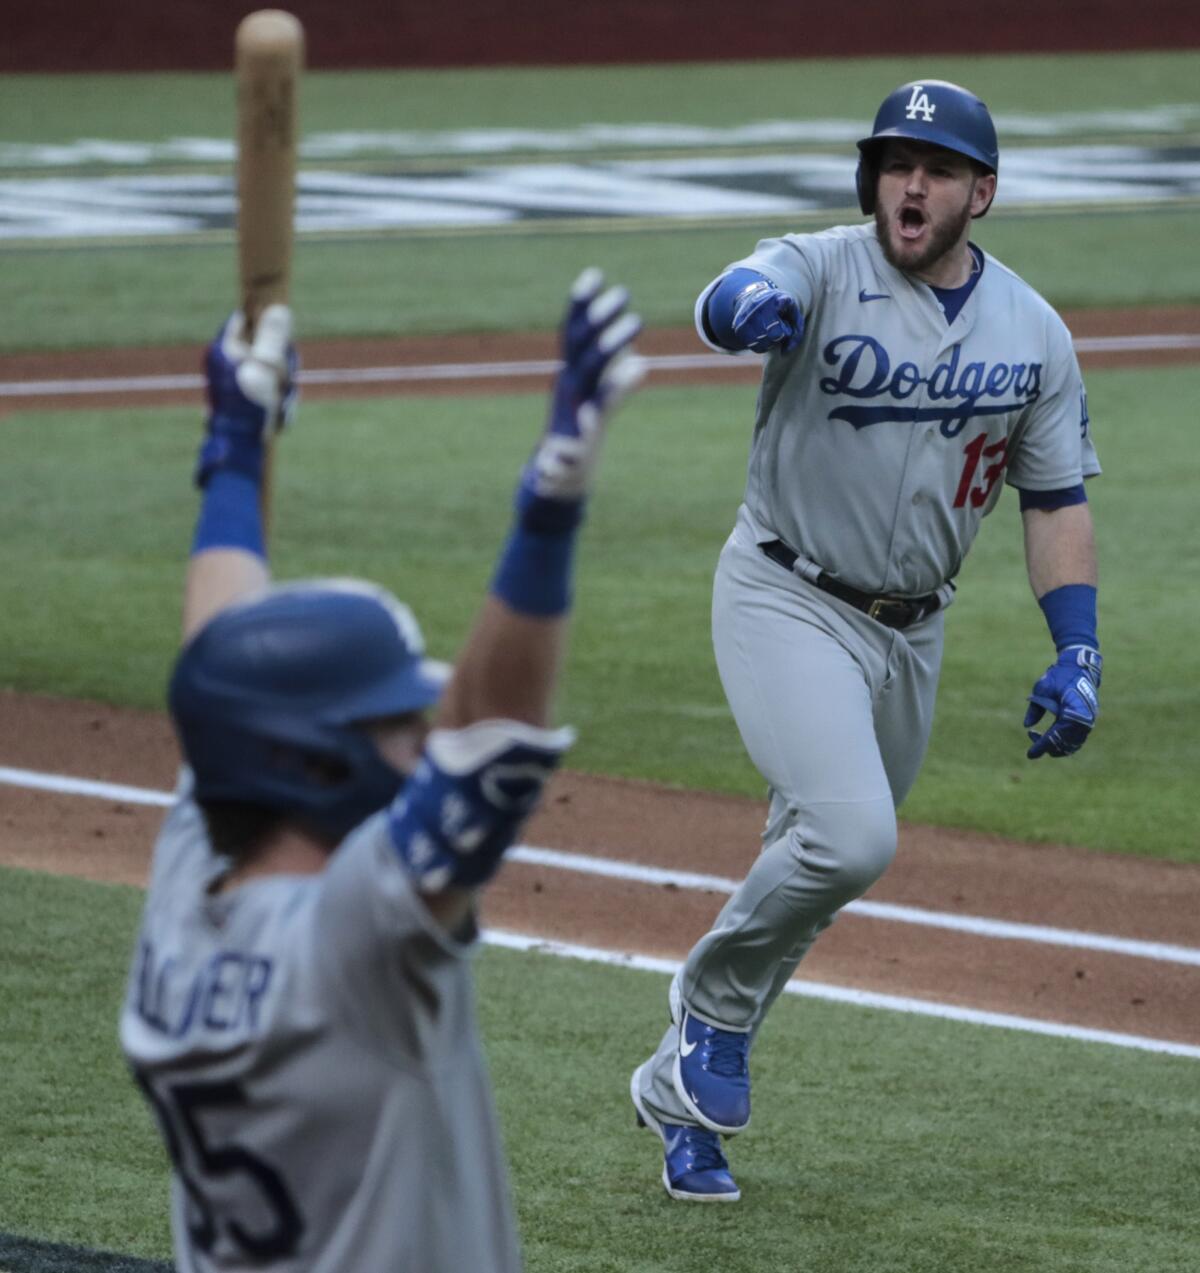 Dodgers first baseman Max Muncy reacts after hitting a home run in the first inning of Game 3.